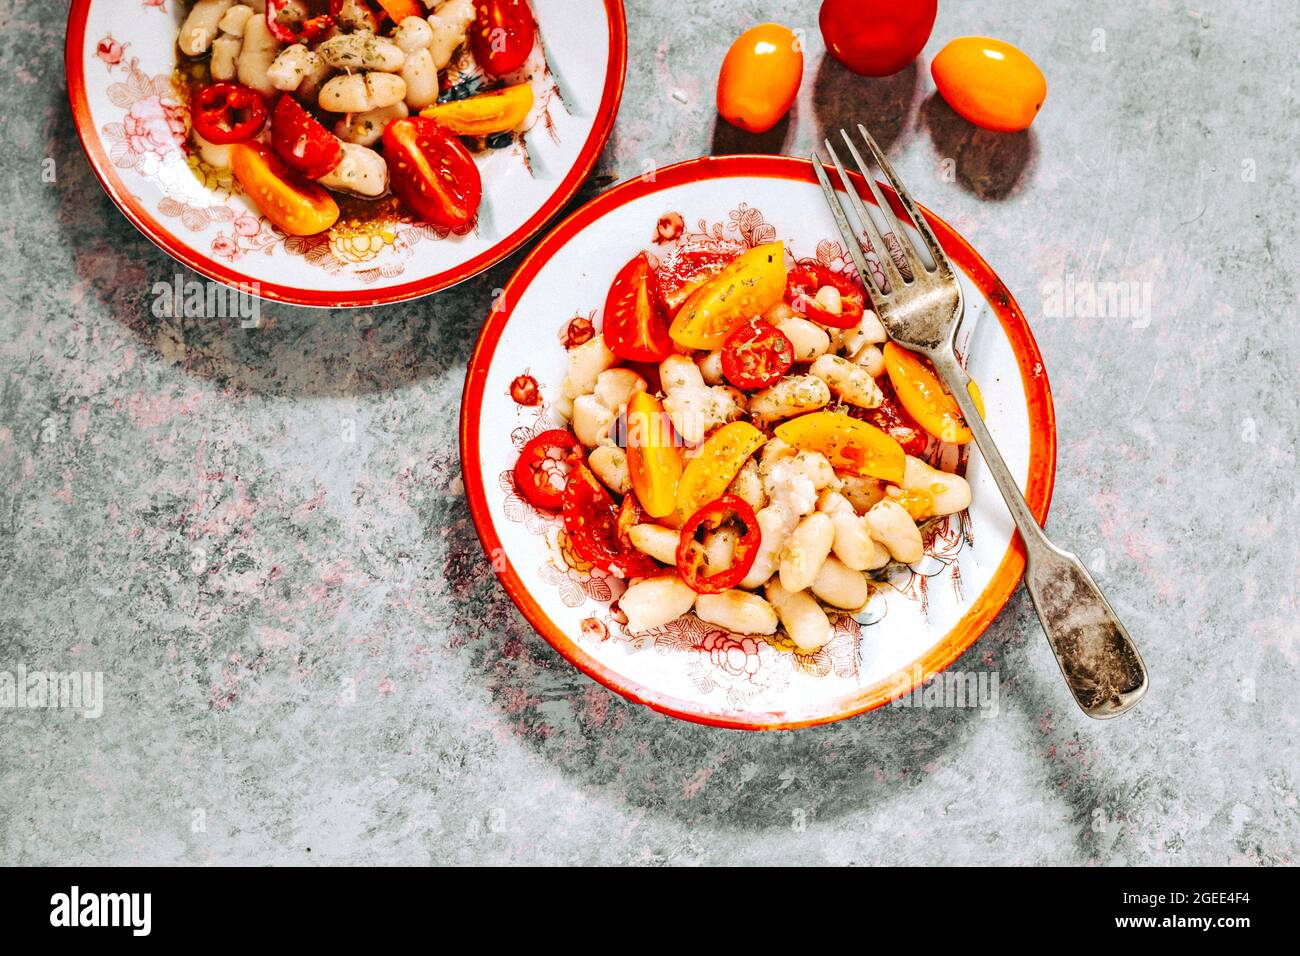 Tomato and Cannelloni Bean Salad with Red and Yellow Tomatoes on a Plate Stock Photo